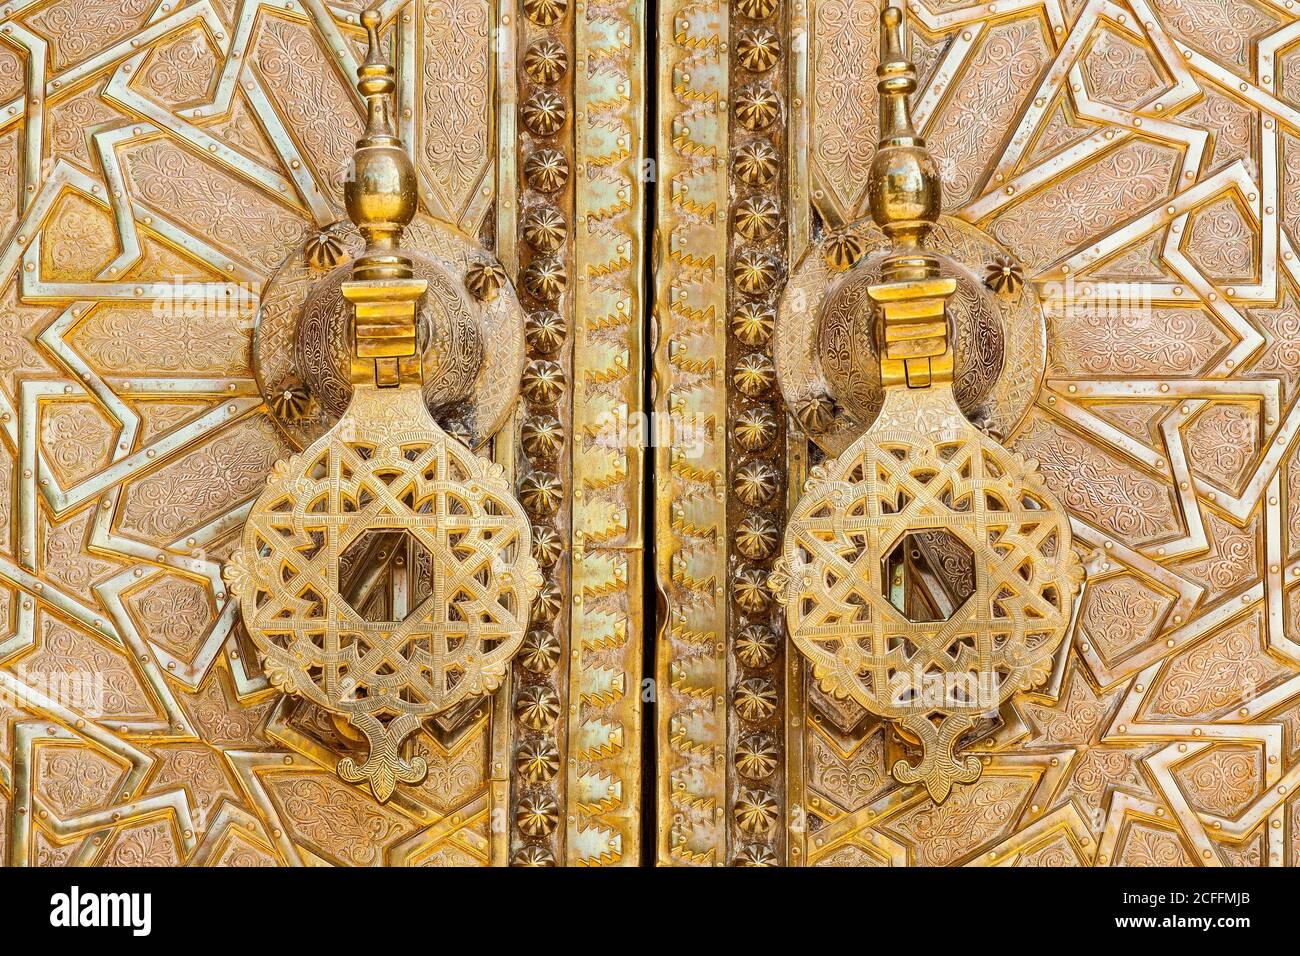 The main gates of the Royal Palace, Fes, Morocco Stock Photo